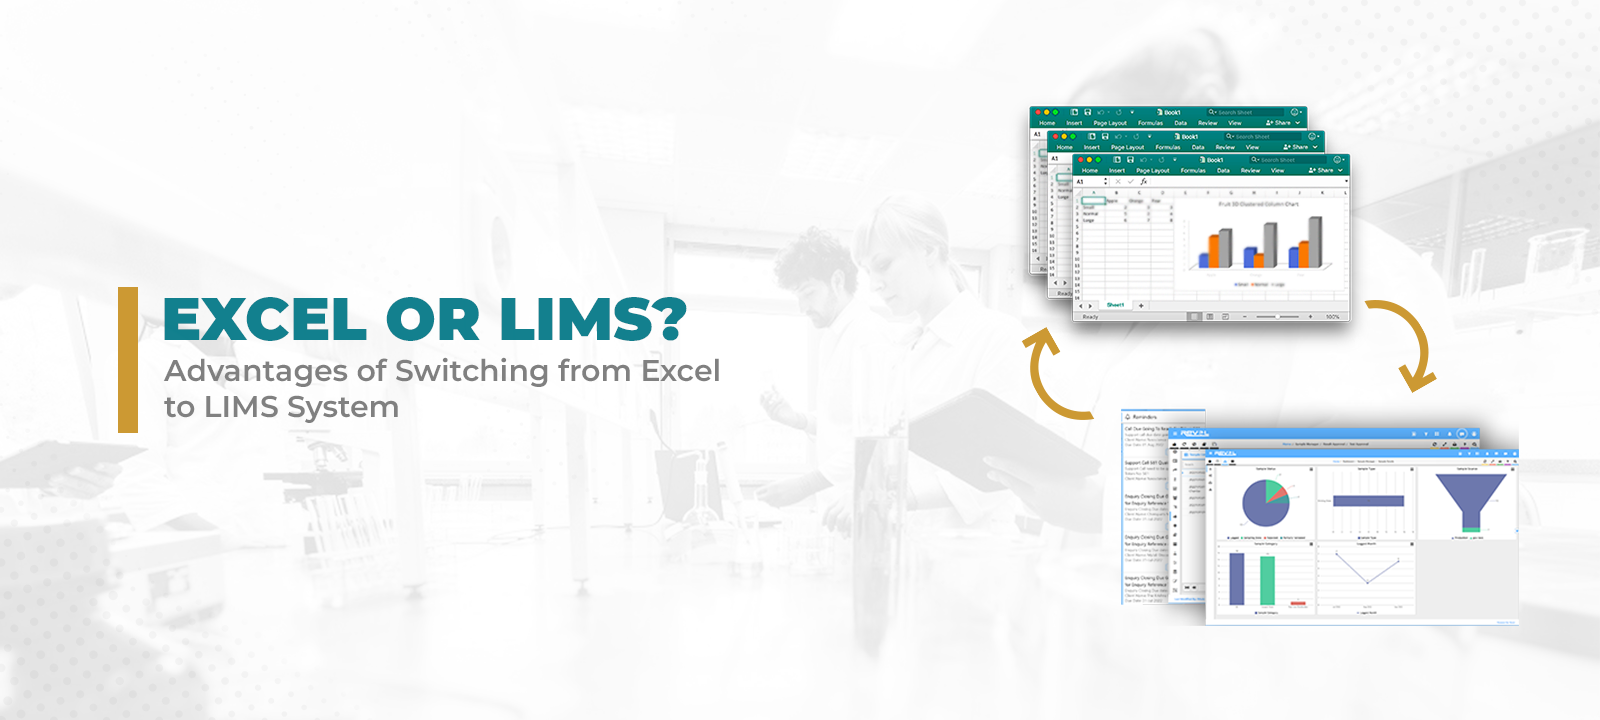 An image showcases a comparison between Excel and LIMS (Laboratory Information Management System) with  icons representing Excel spreadsheets and LIMS functionalities.